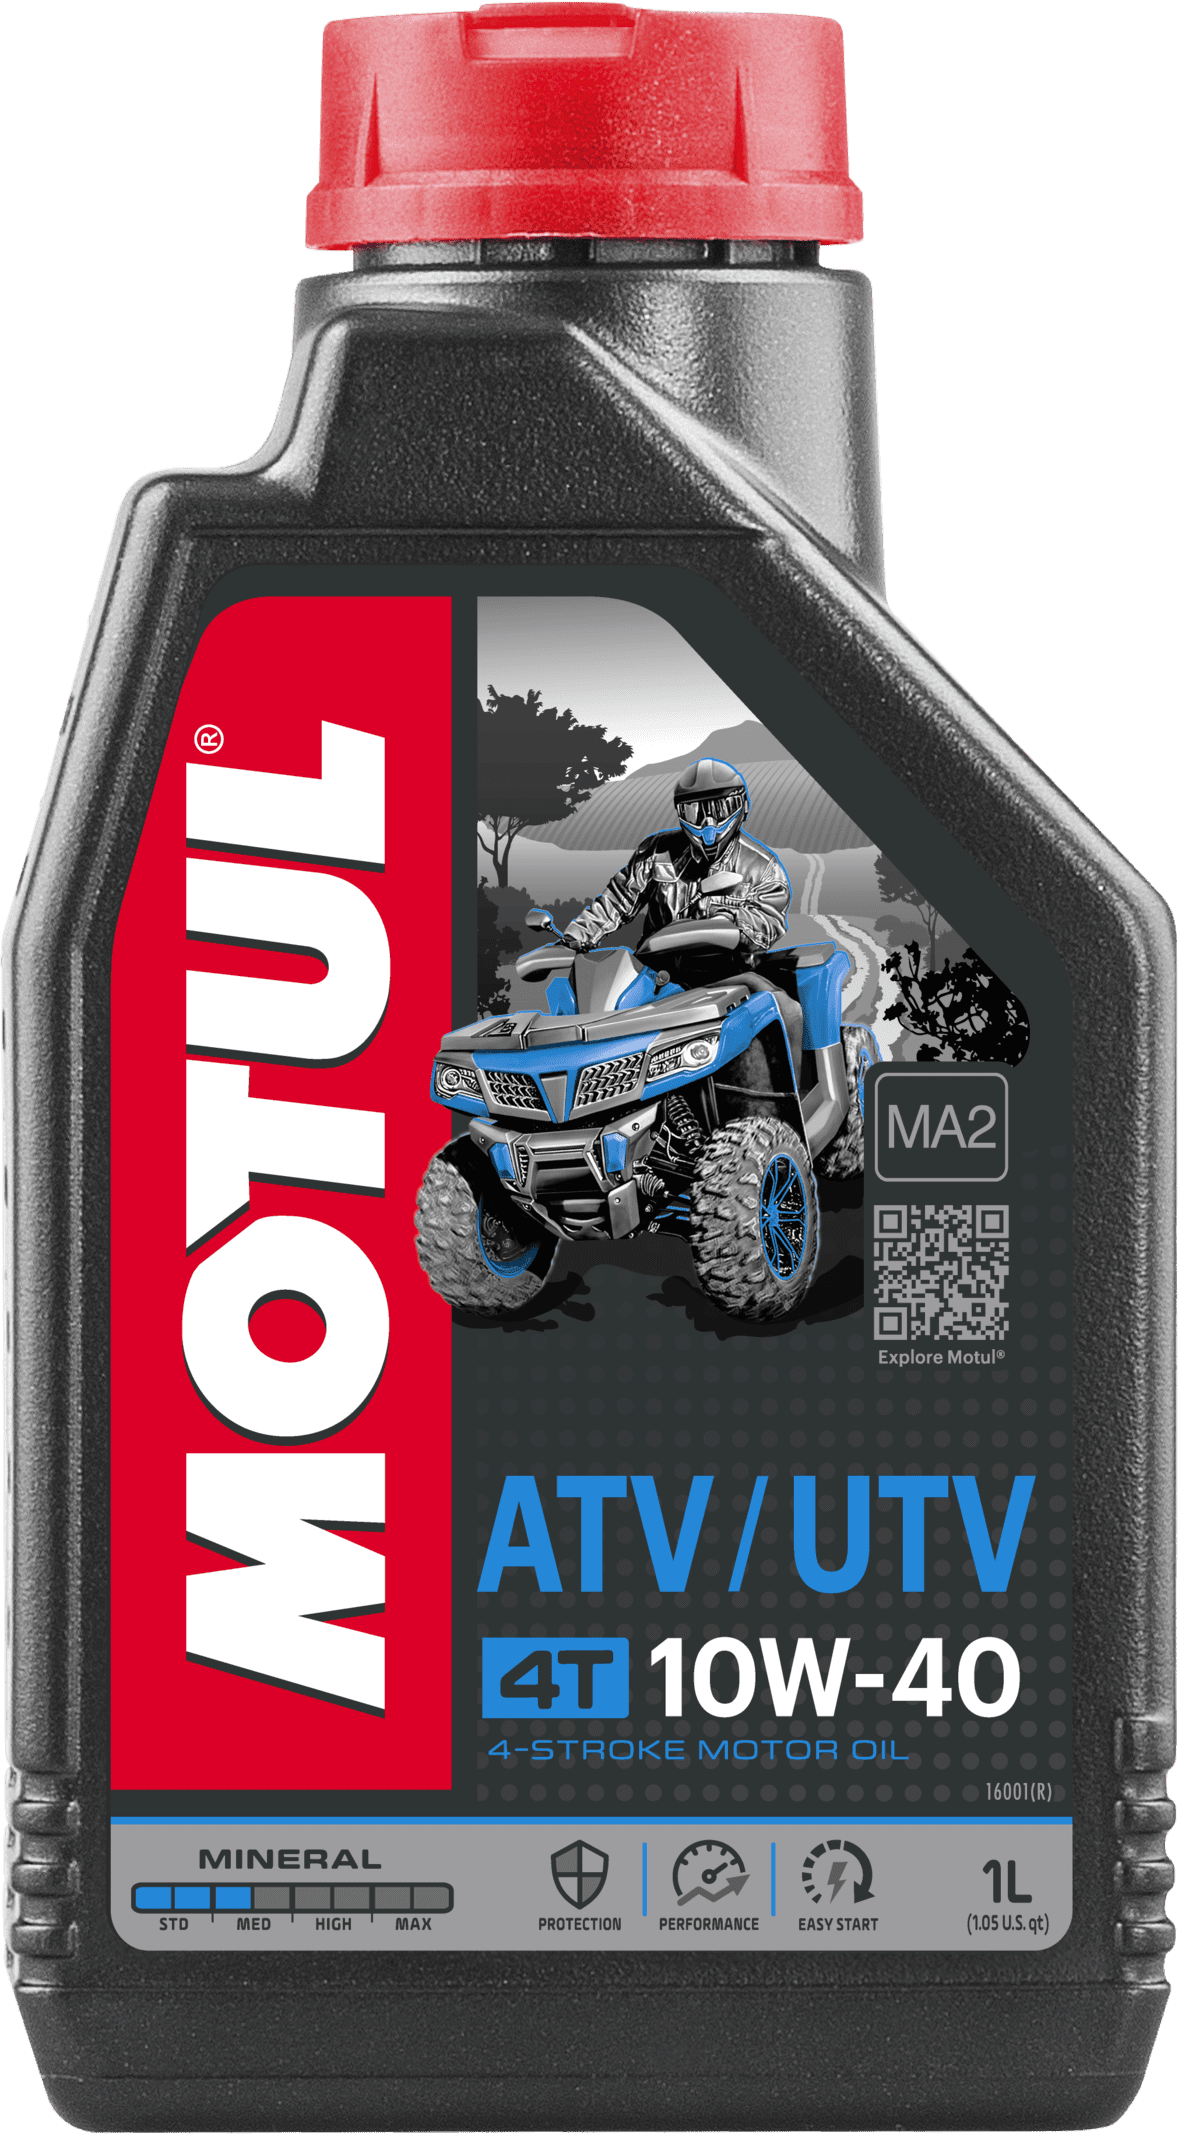 105878-1 Mineral 4-stroke engine oil designed for 4-stroke ATVs/UTVs for both recreational and utility activities.